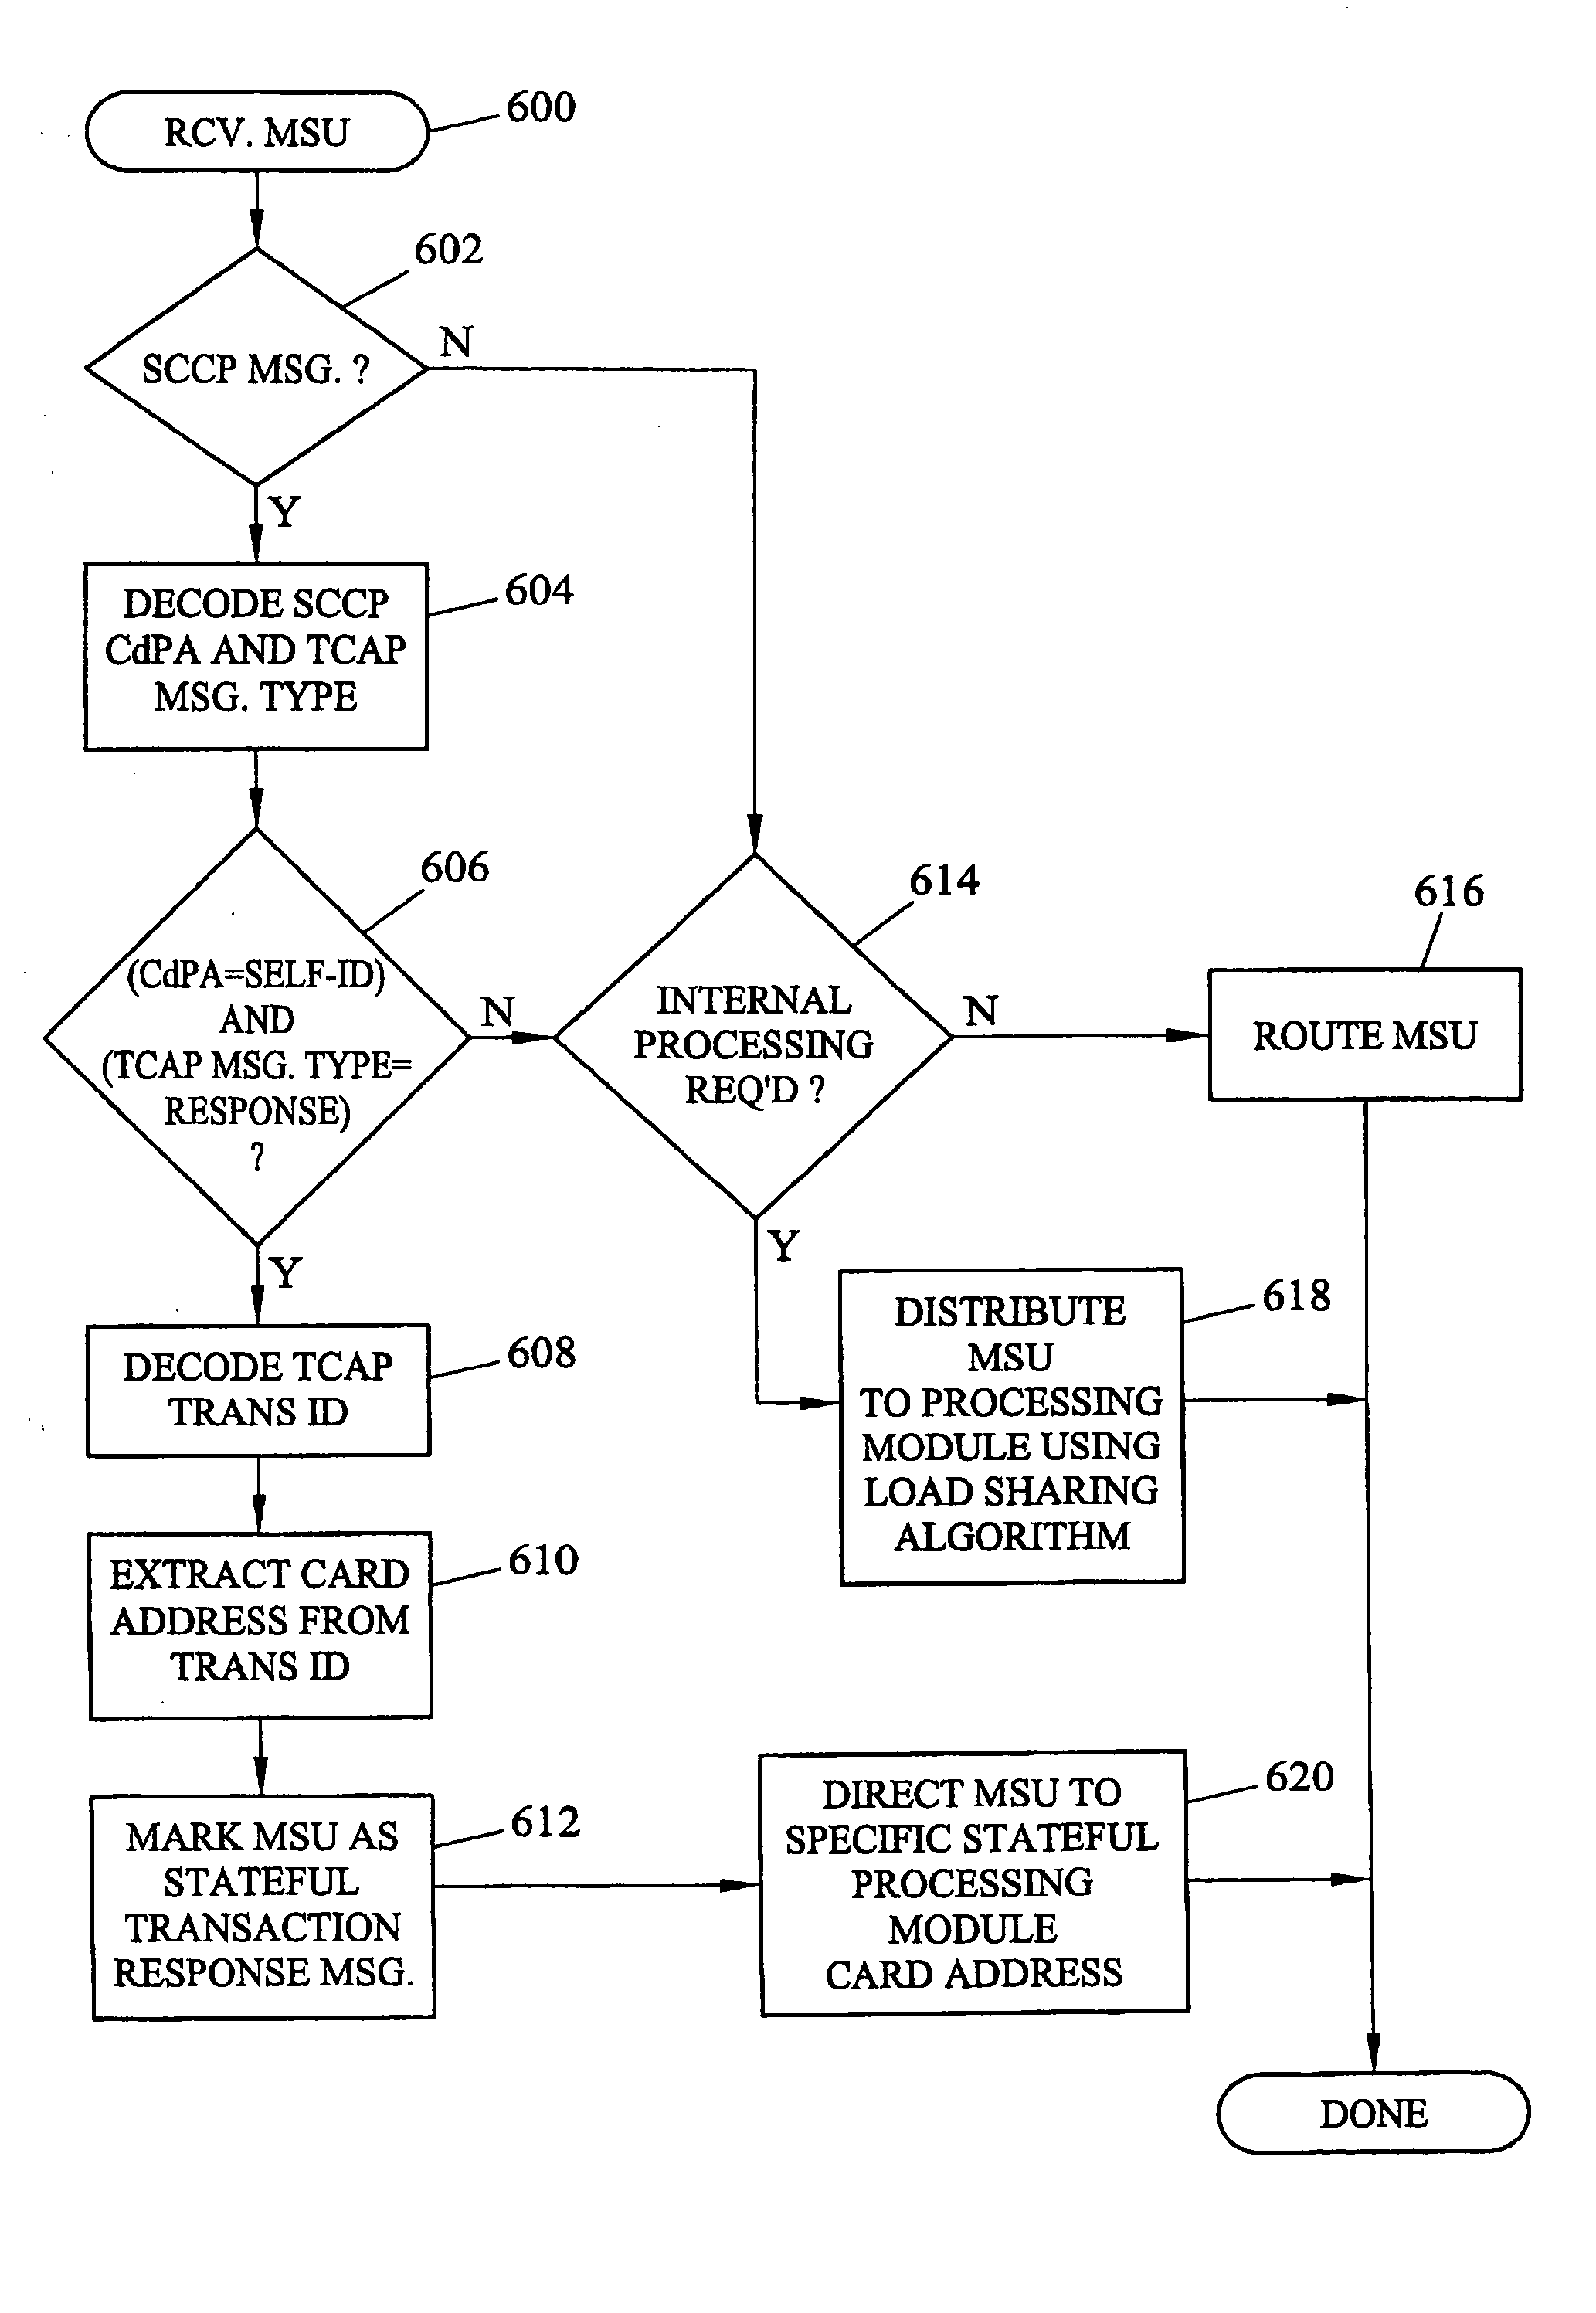 Systems and methods of performing stateful signaling transactions in a distributed processing environment